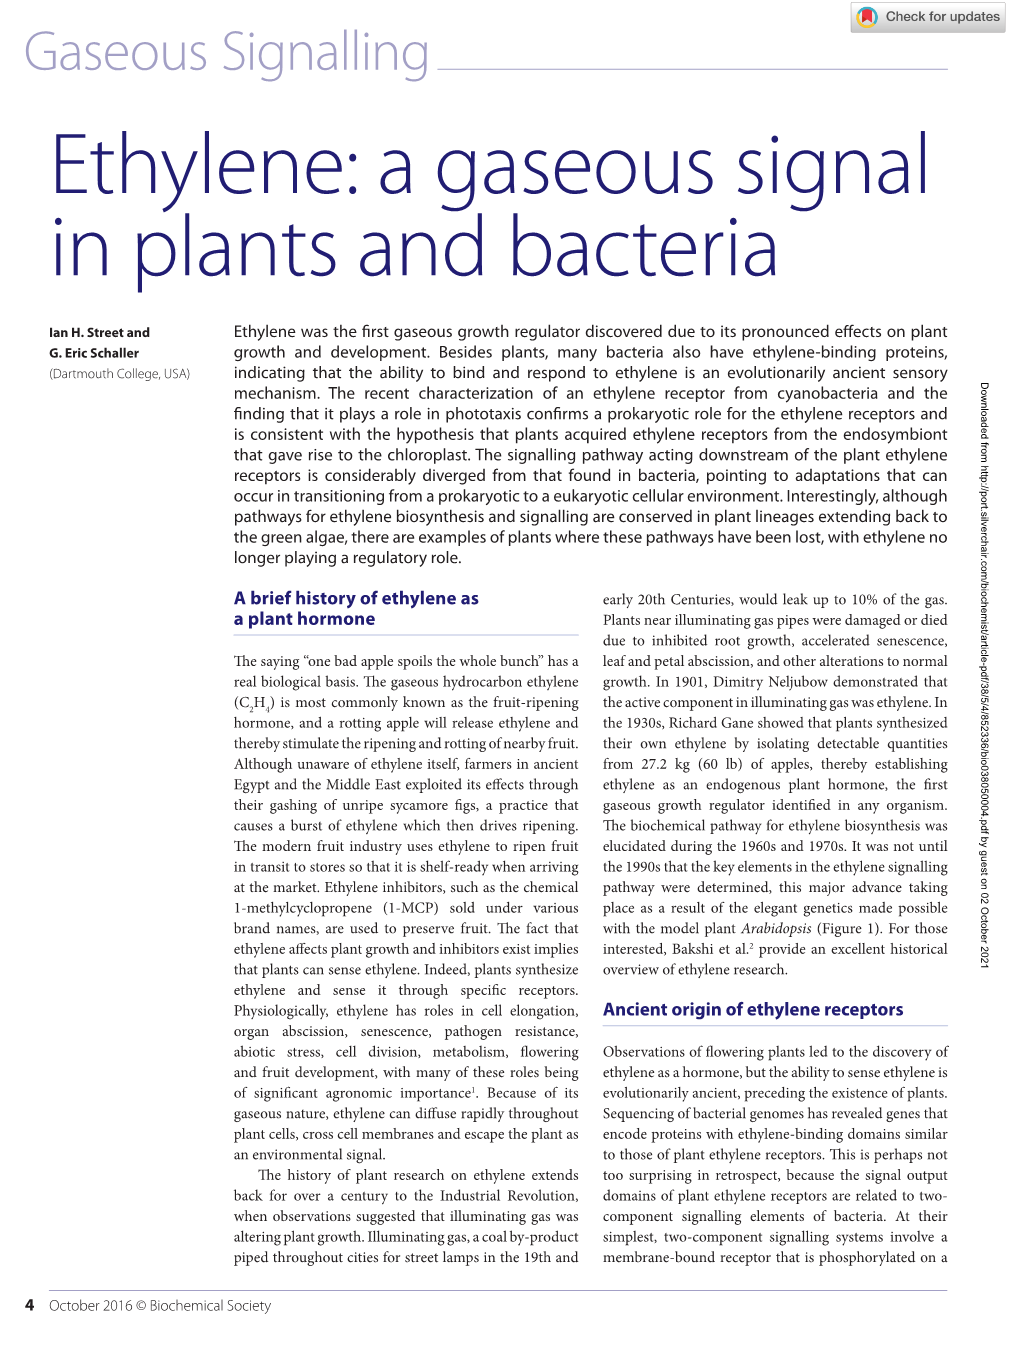 Ethylene: a Gaseous Signal in Plants and Bacteria